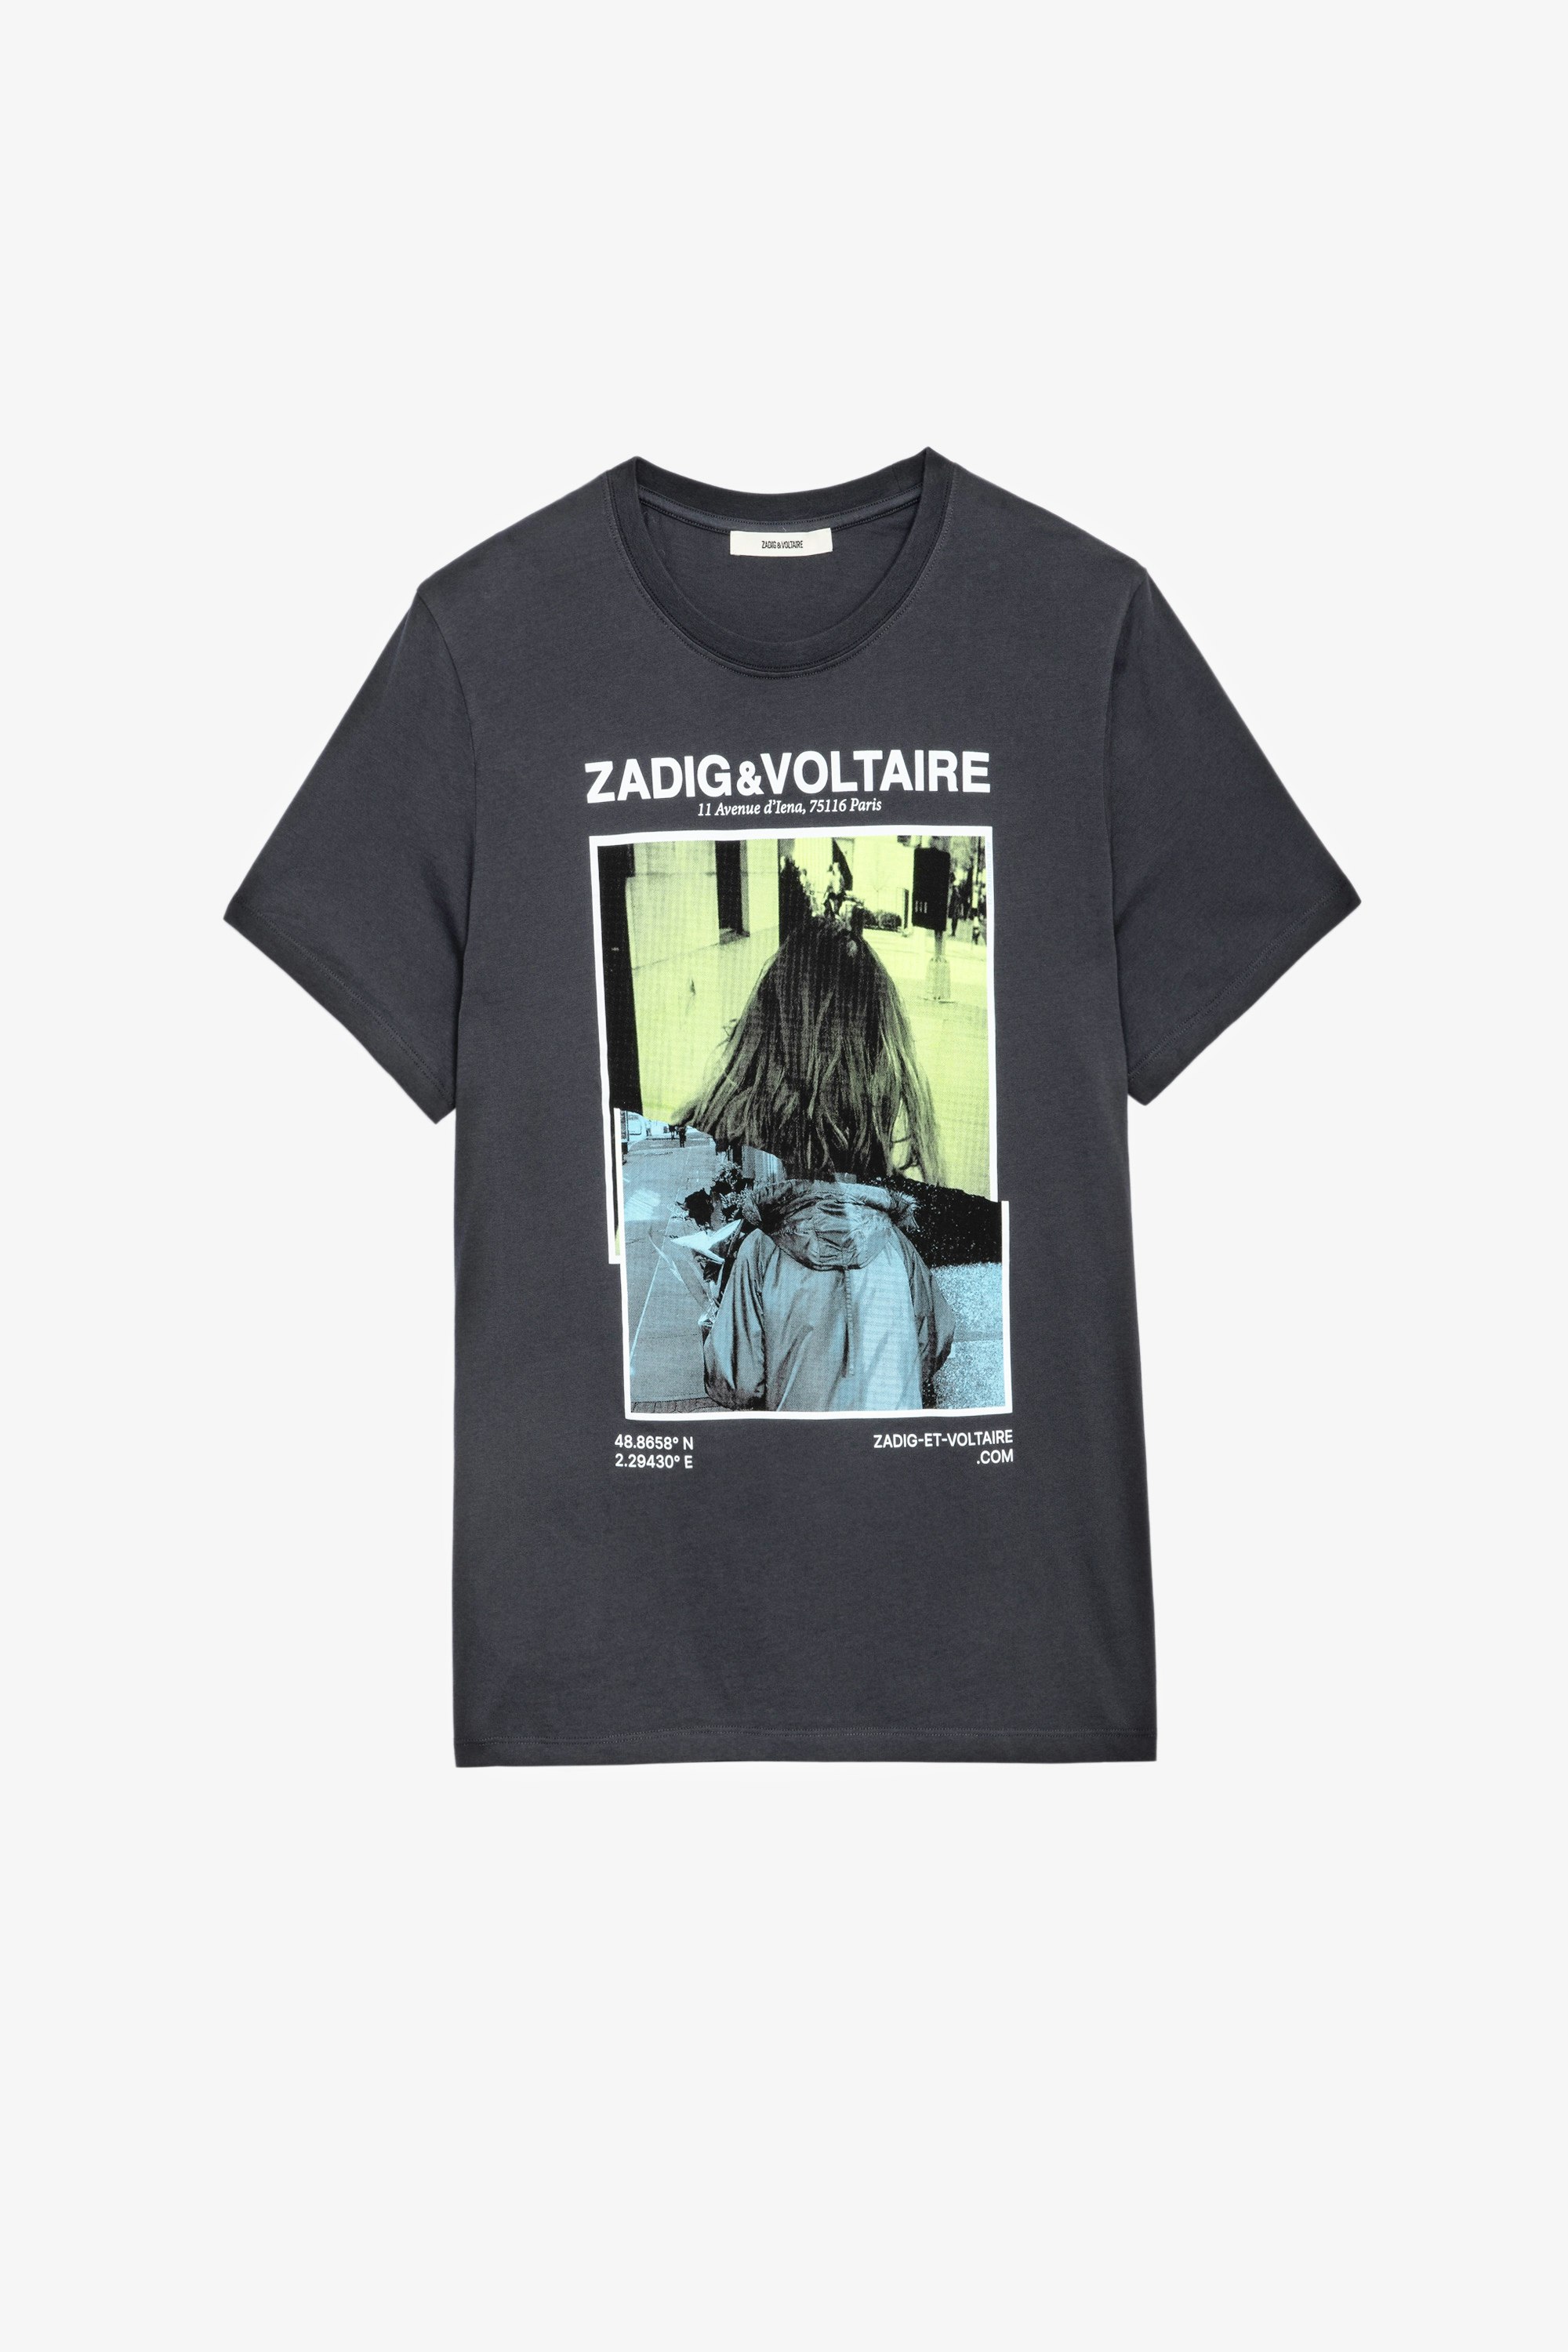 Ted フォトプリント コンサート Ｔシャツ Men’s anthracite cotton T-shirt with photoprint